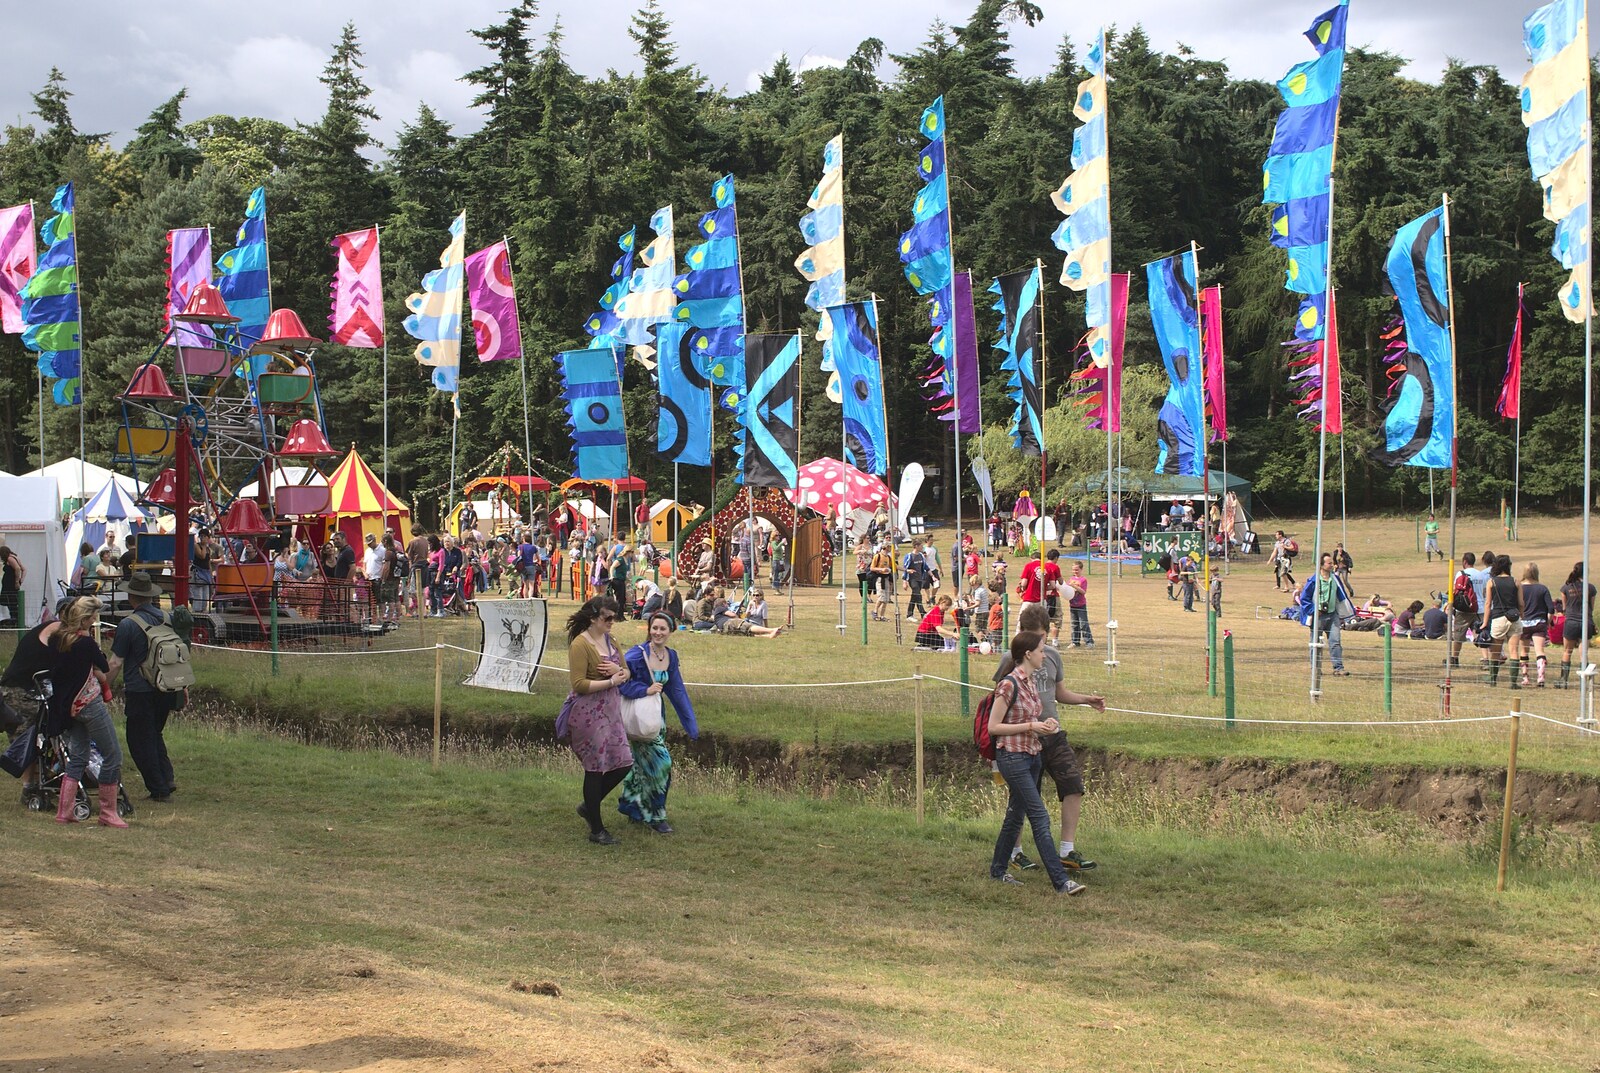 Flags in the children's area from The Latitude Festival, Henham Park, Suffolk - 20th July 2009